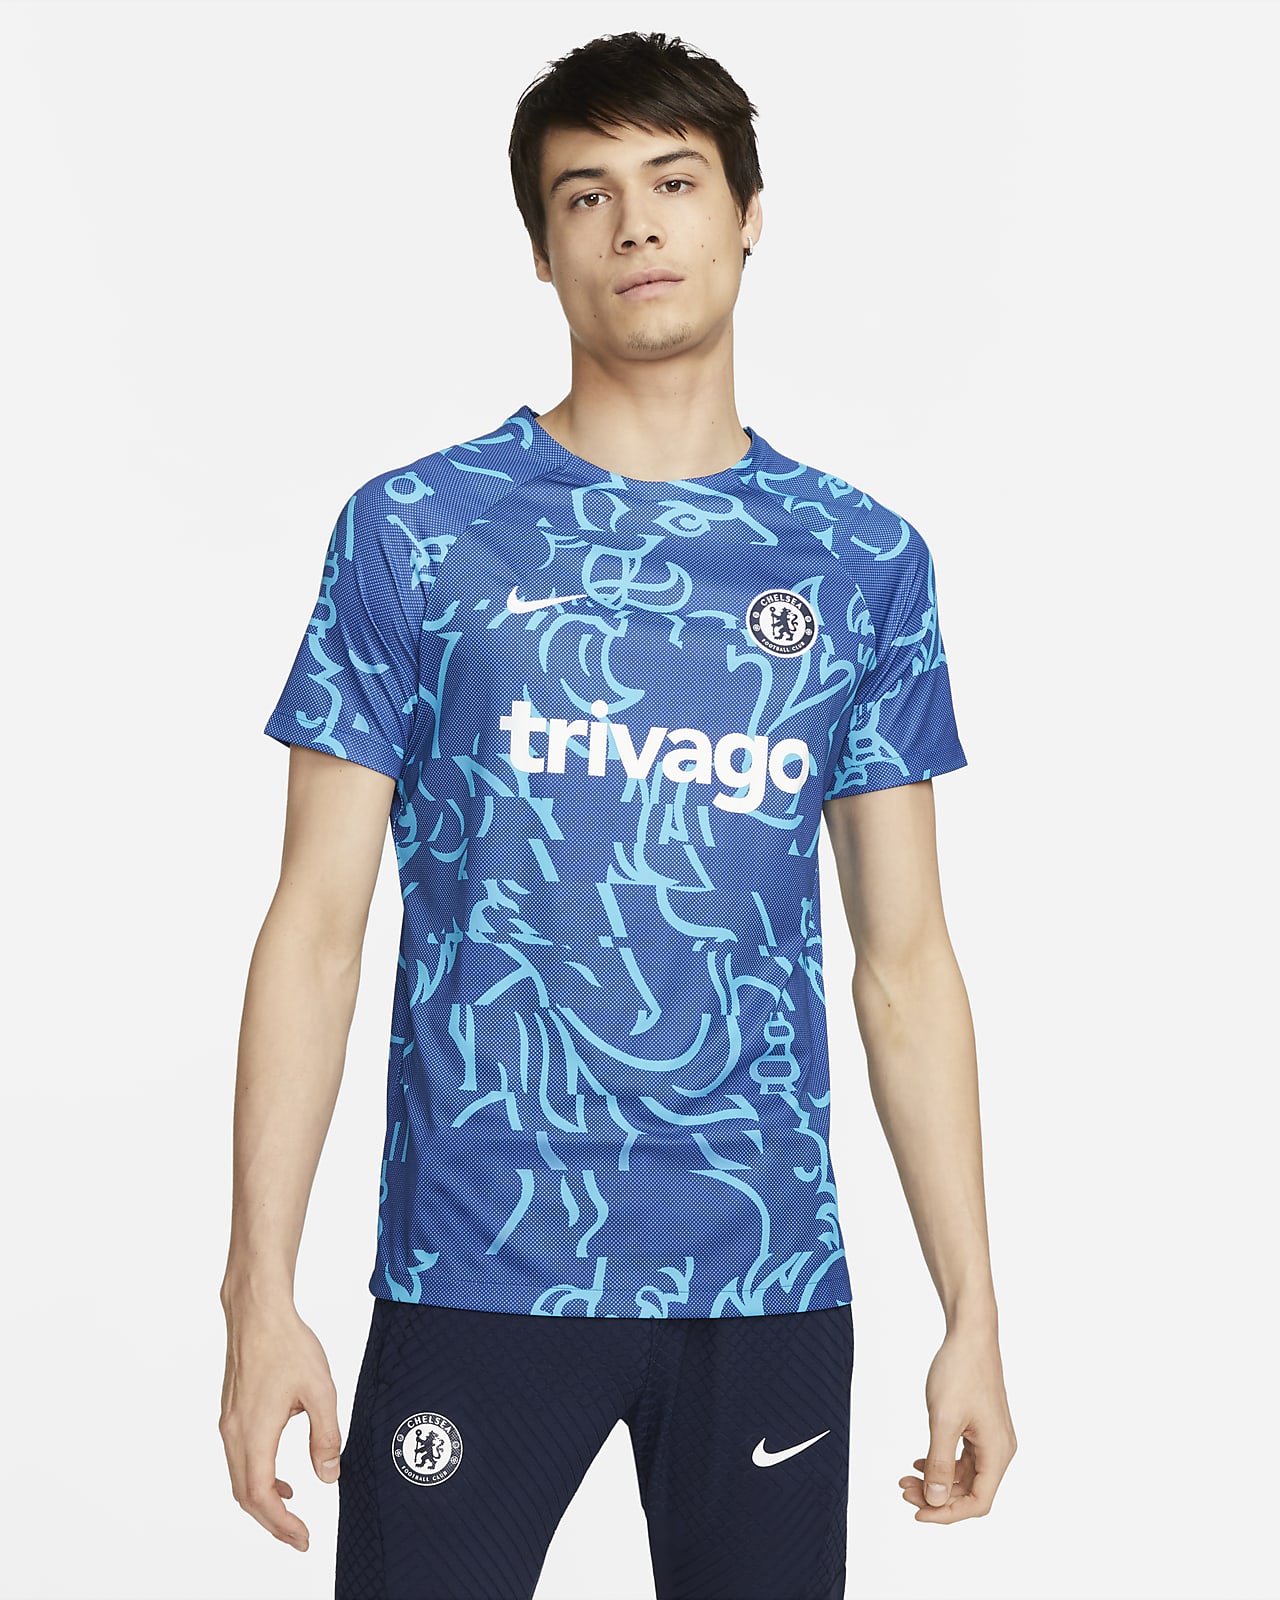 https://static.nike.com/a/images/t_PDP_1280_v1/f_auto,q_auto:eco/f87e931f-c454-4b57-b166-9e23a15da36a/chelsea-fc-mens-dri-fit-pre-match-soccer-top-M1rqtv.png